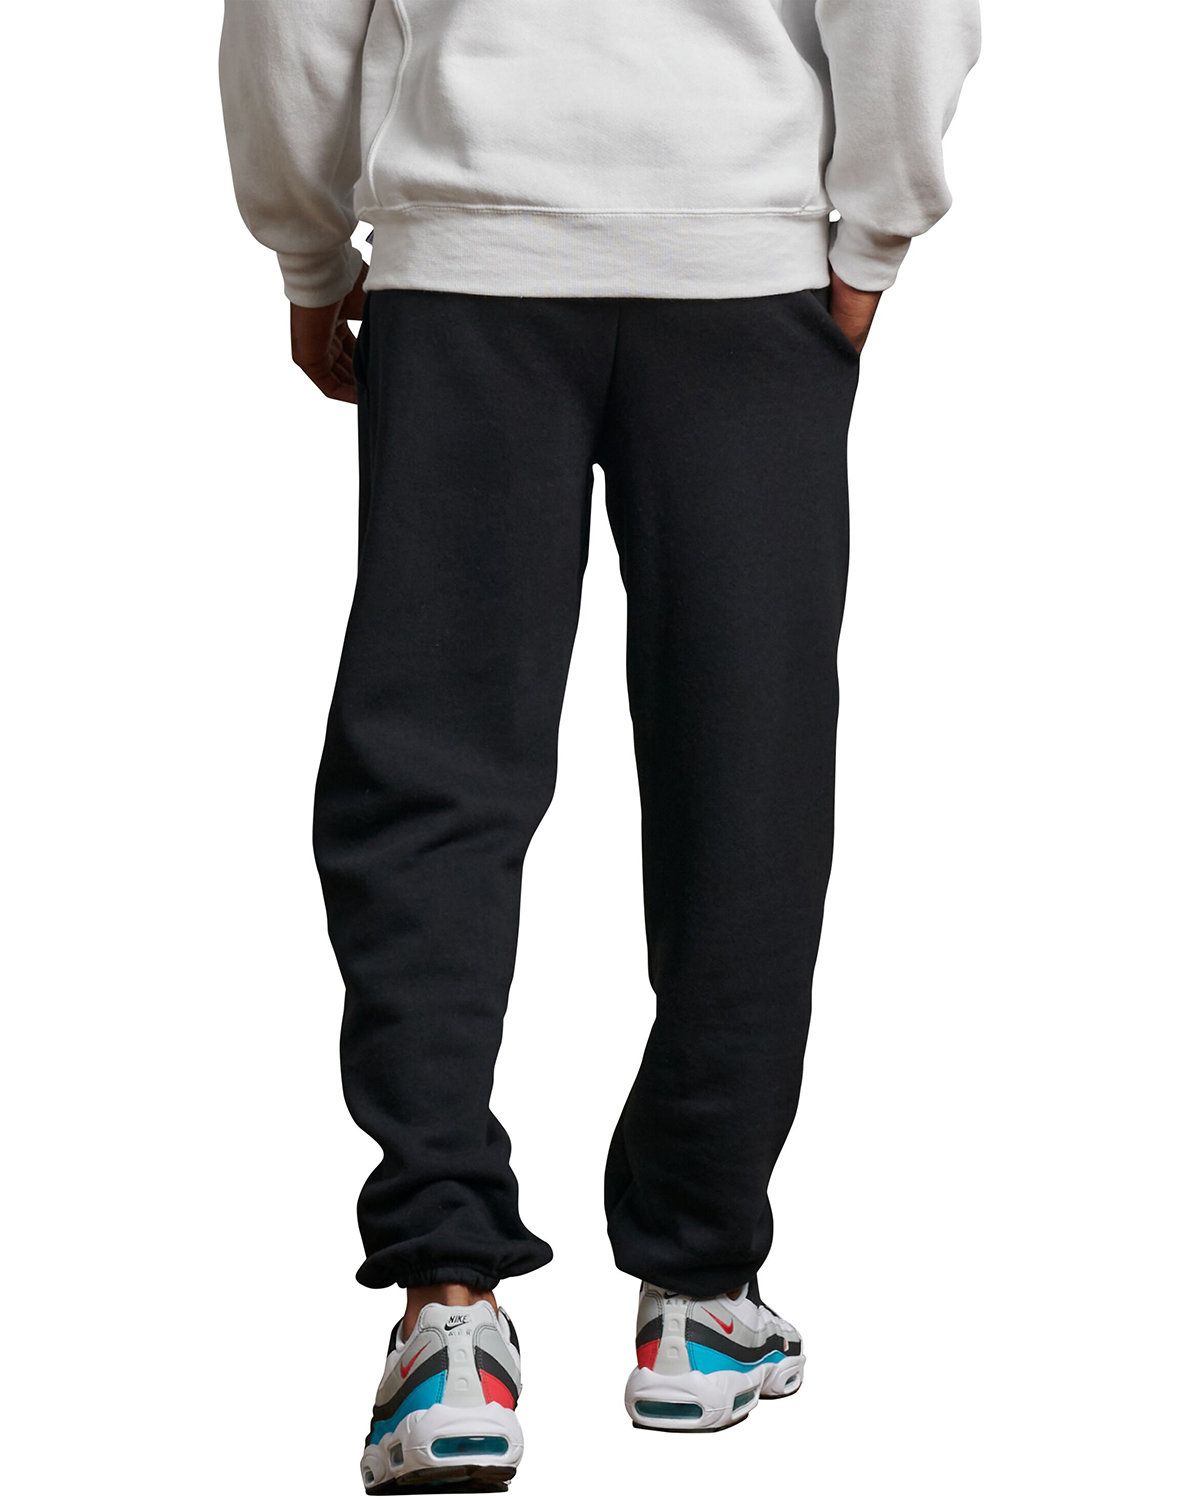 Russell Athletic 029HBM - Dri Power Closed Bottom Sweatpants with